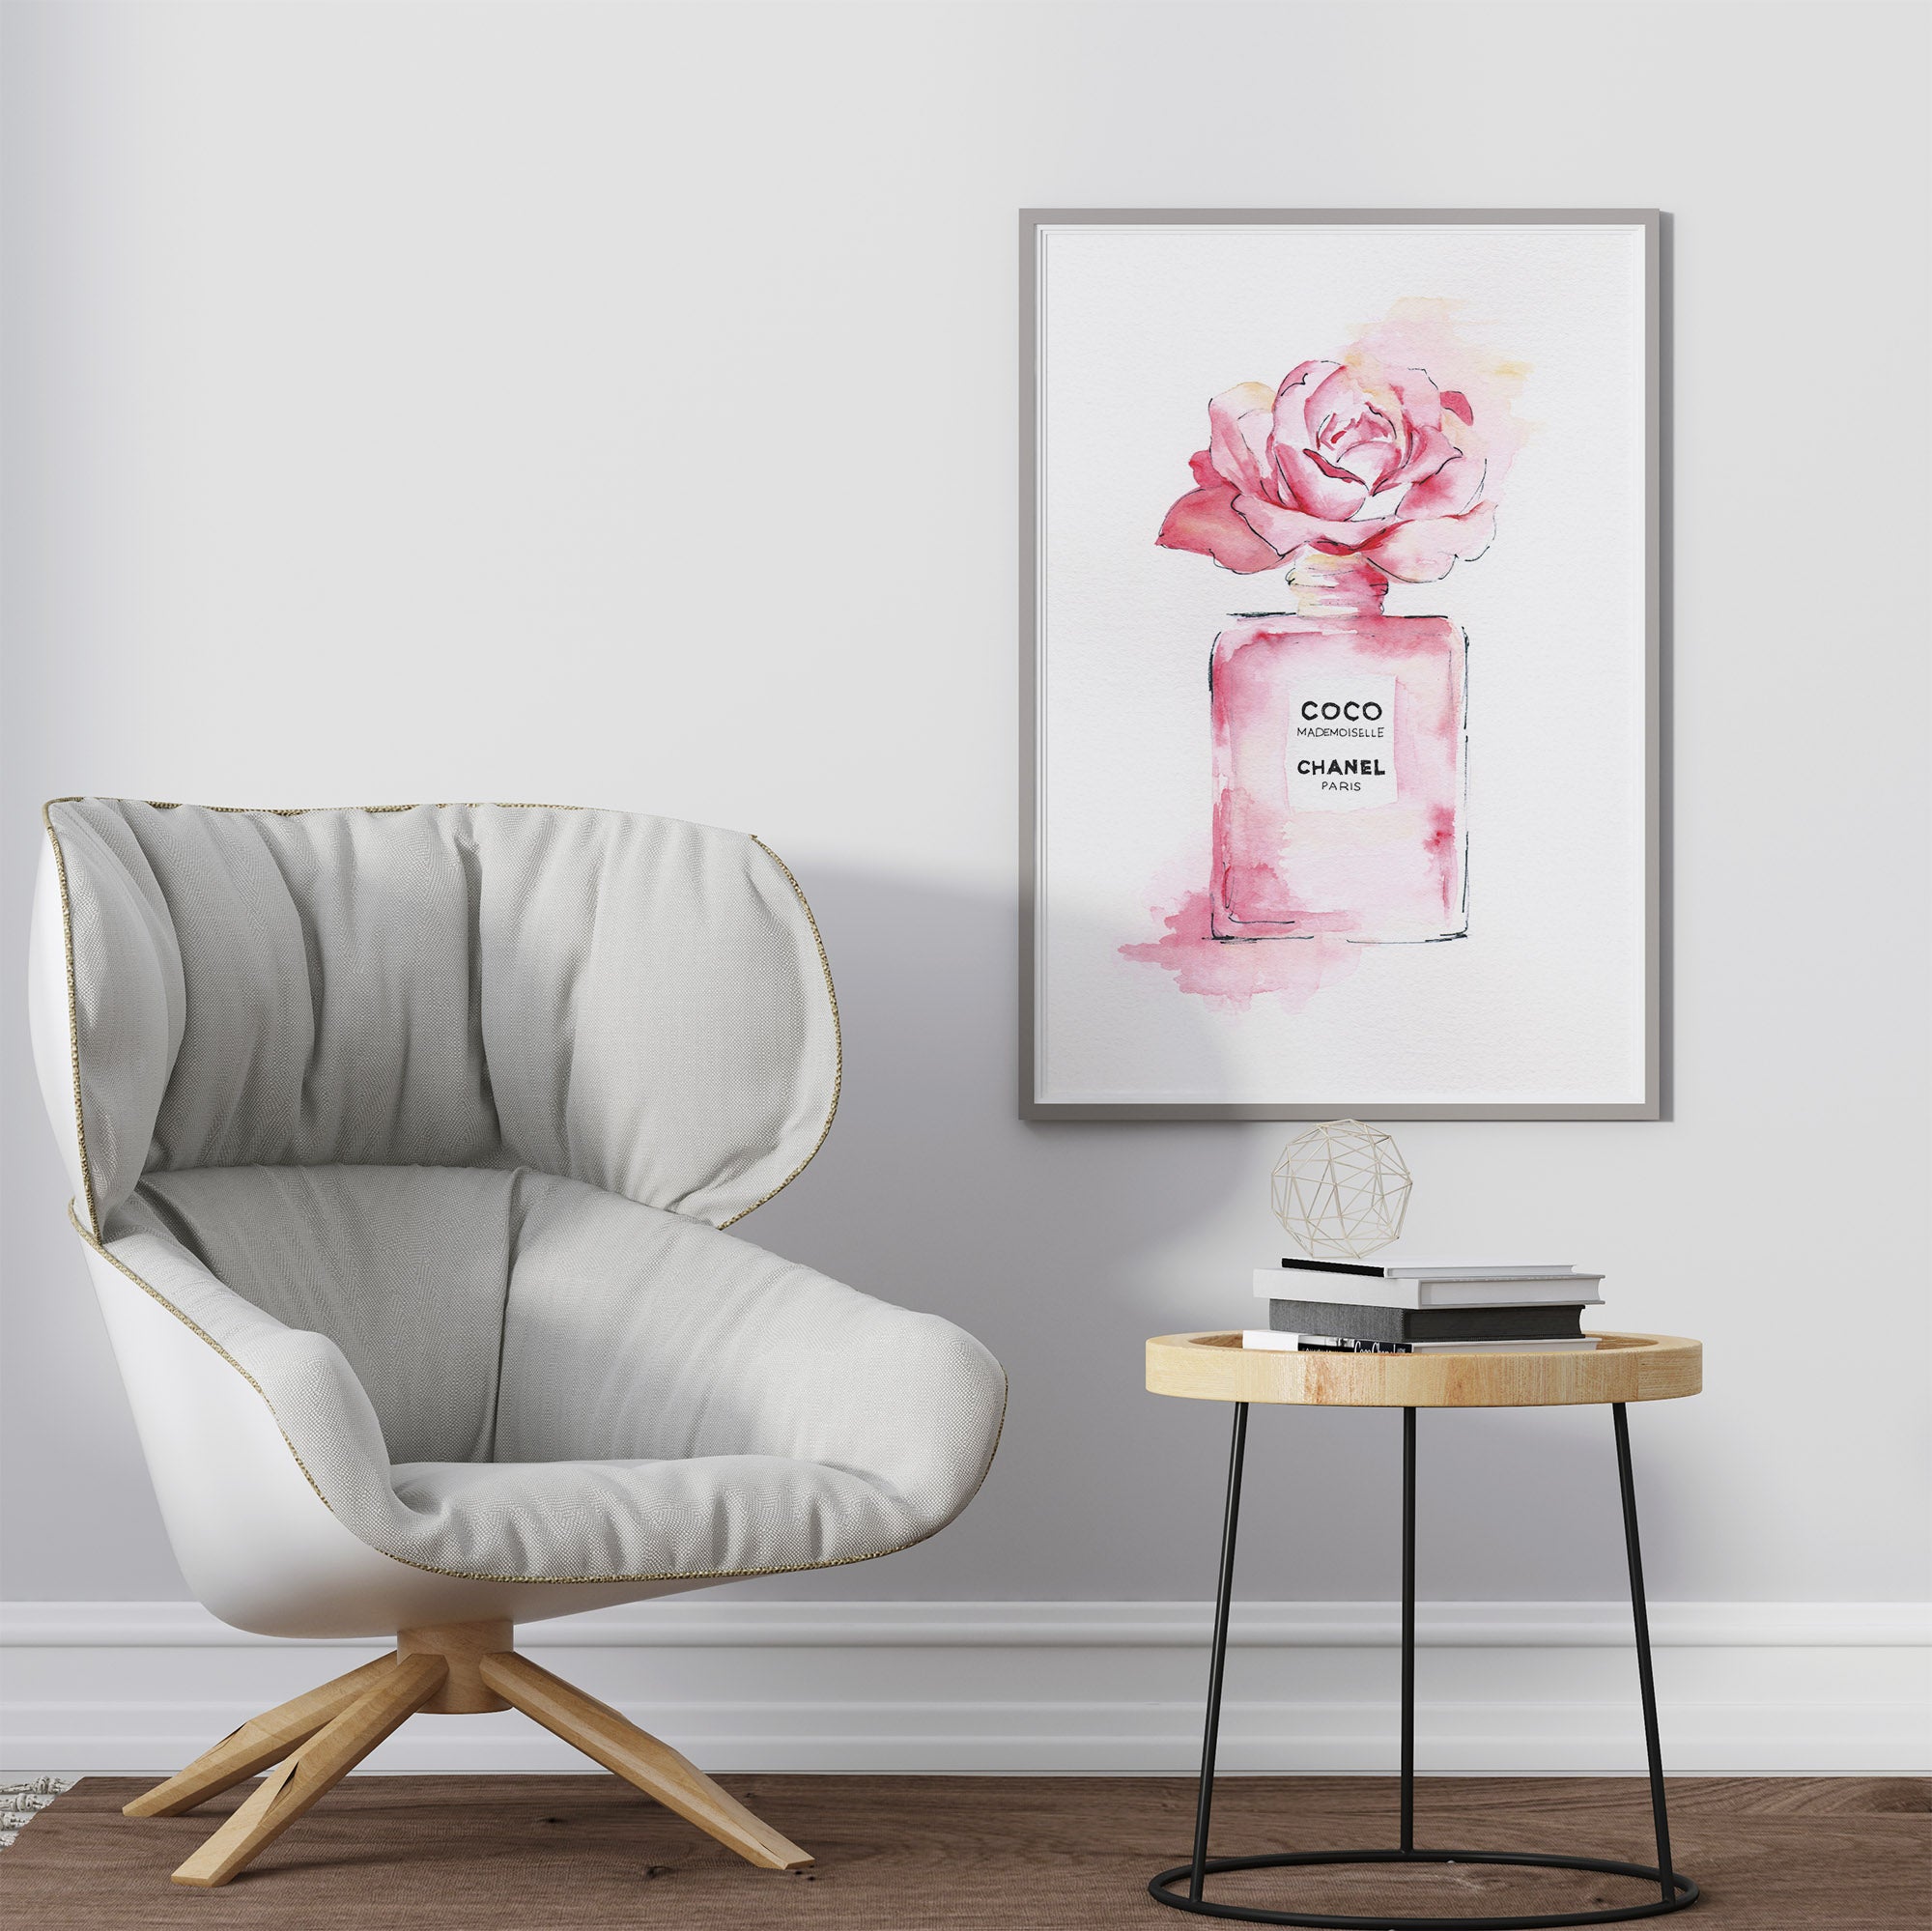 Pink art print with a Coco Chanel perfume bottle